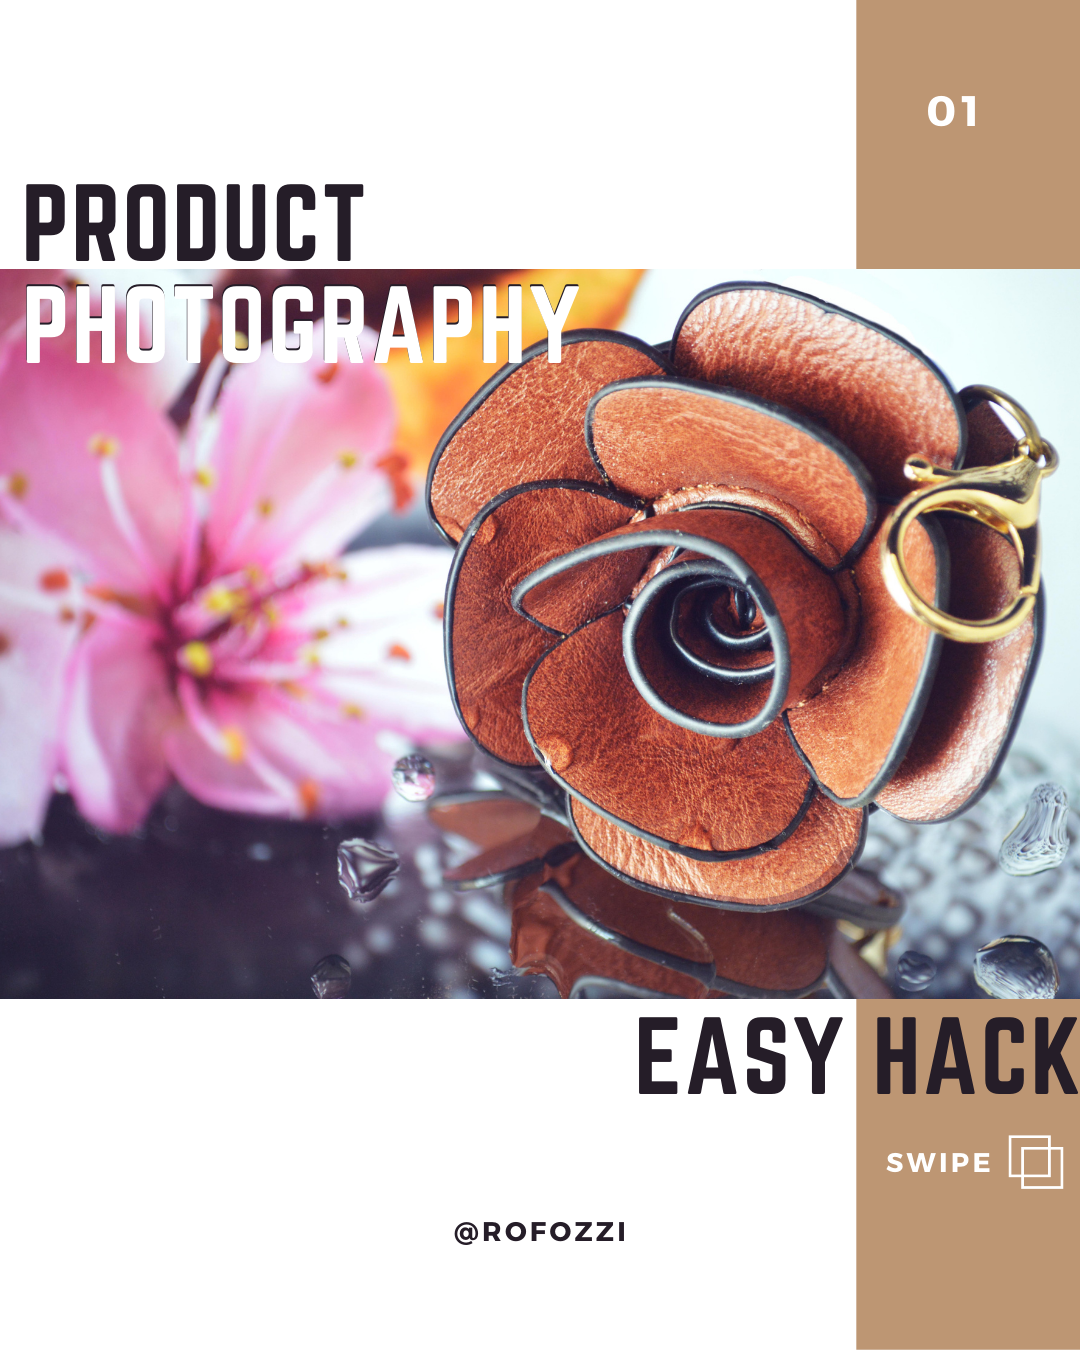 DIY Easy Hack for Great Product Photography